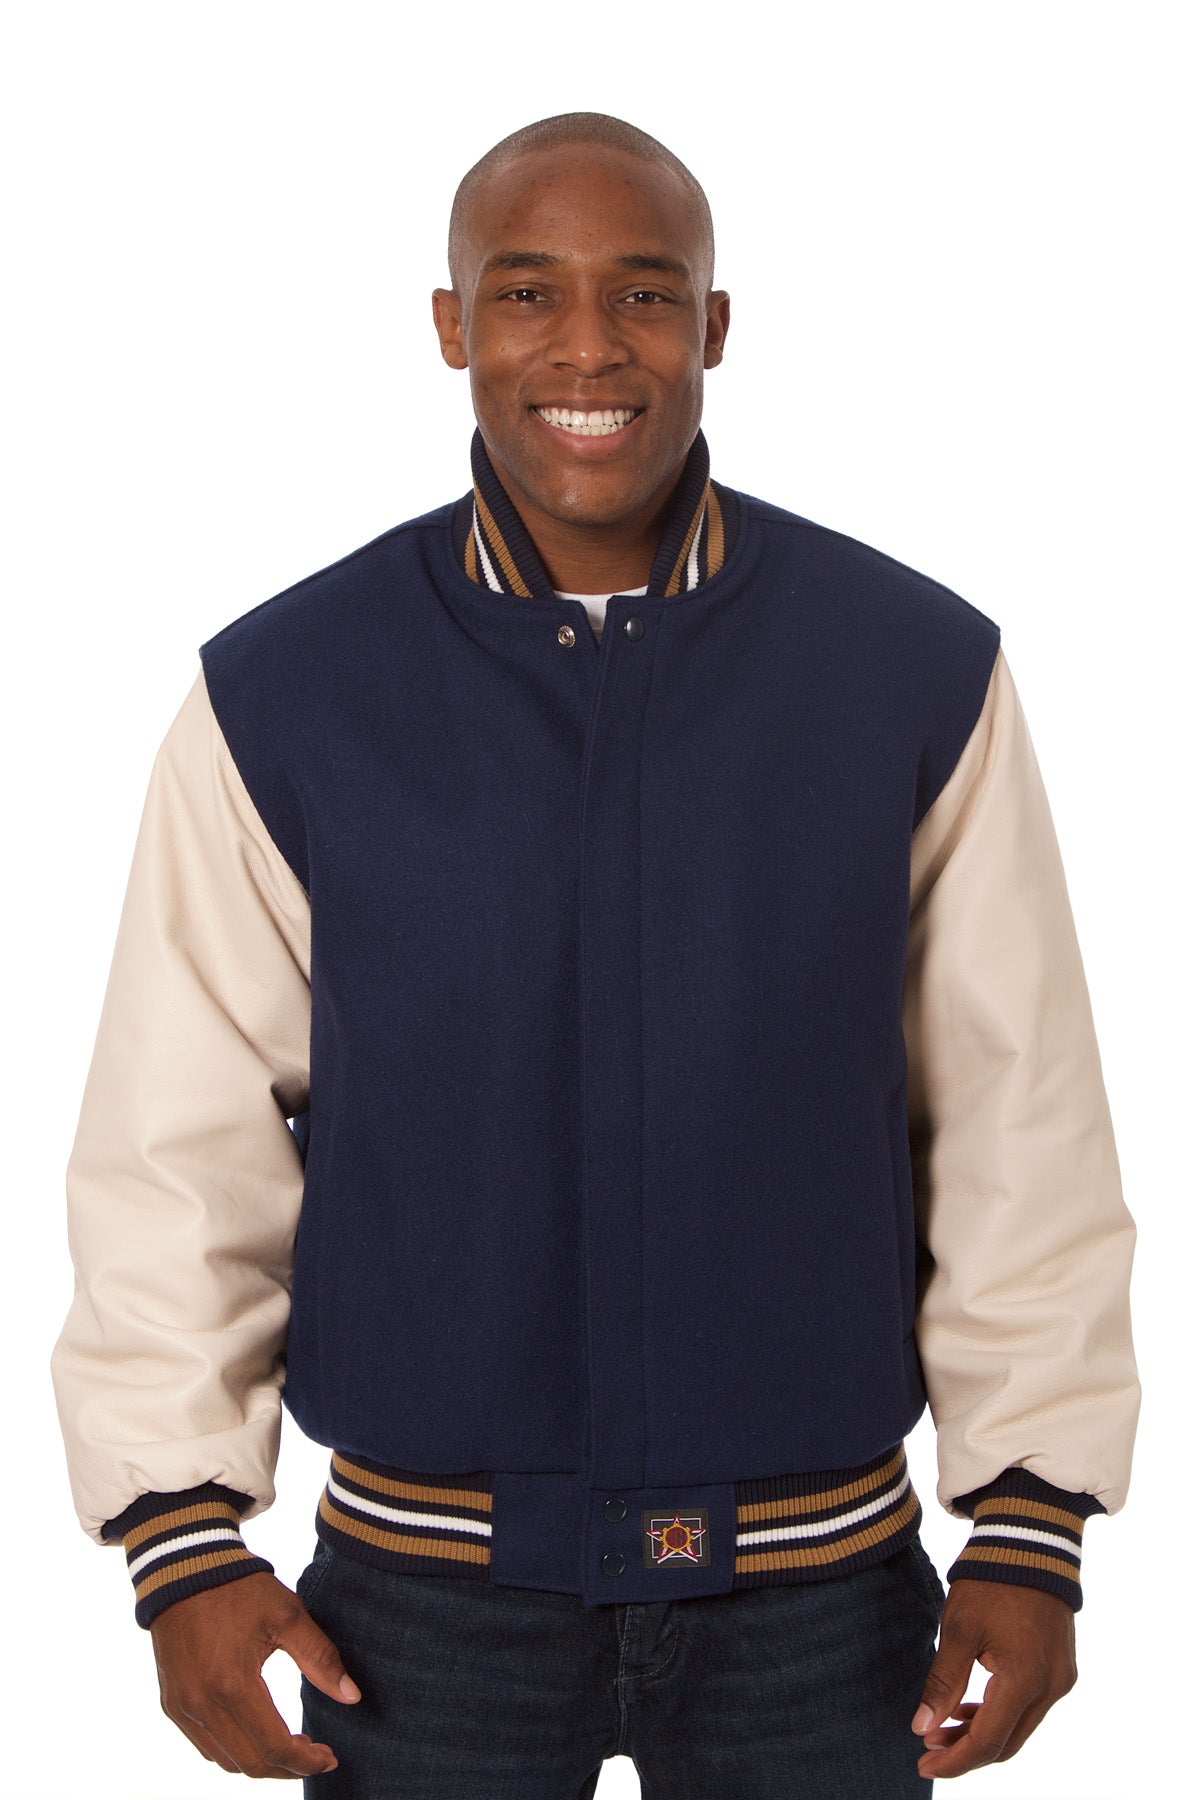 Wool and Leather Varsity Jacket in Navy and Cream